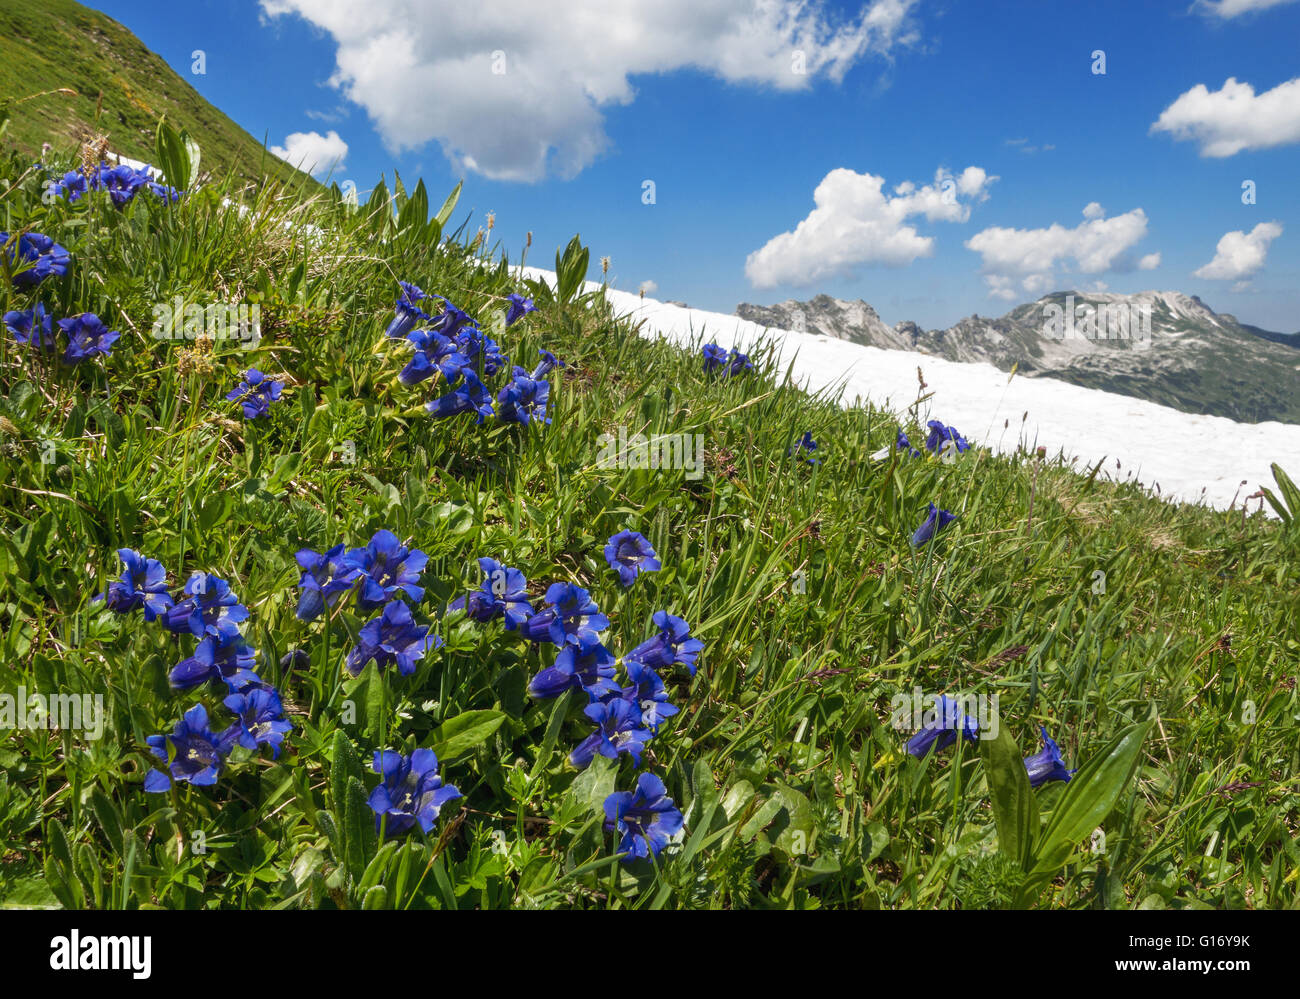 Blooming gentian in the mountains Stock Photo